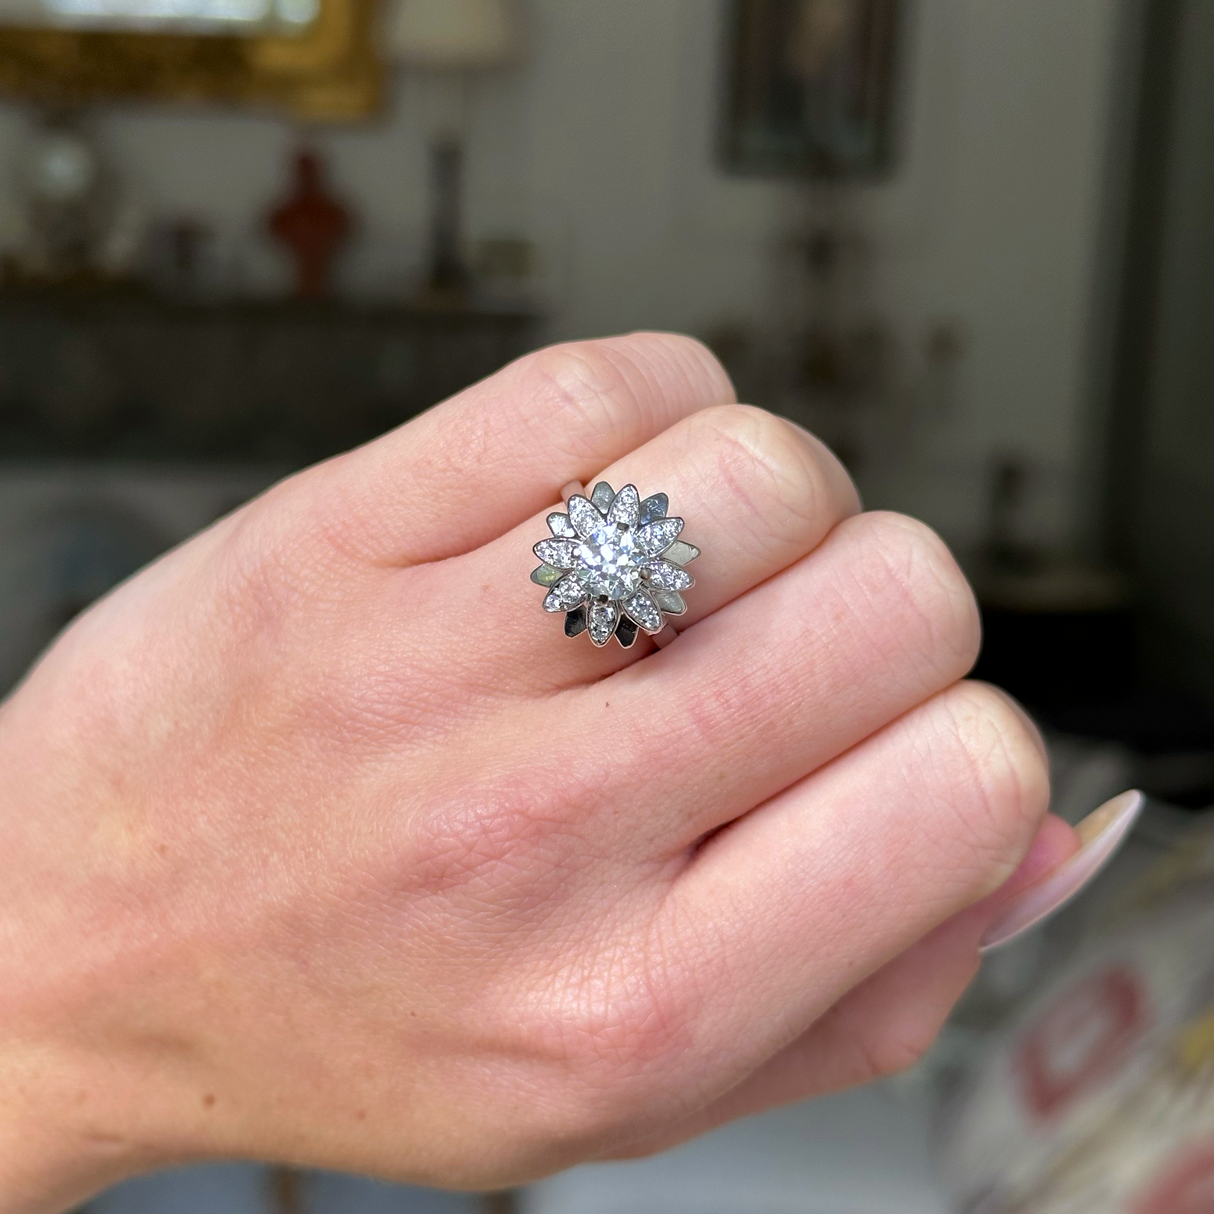 french diamond engagement ring resembling a flower worn on closed hand, front view. 